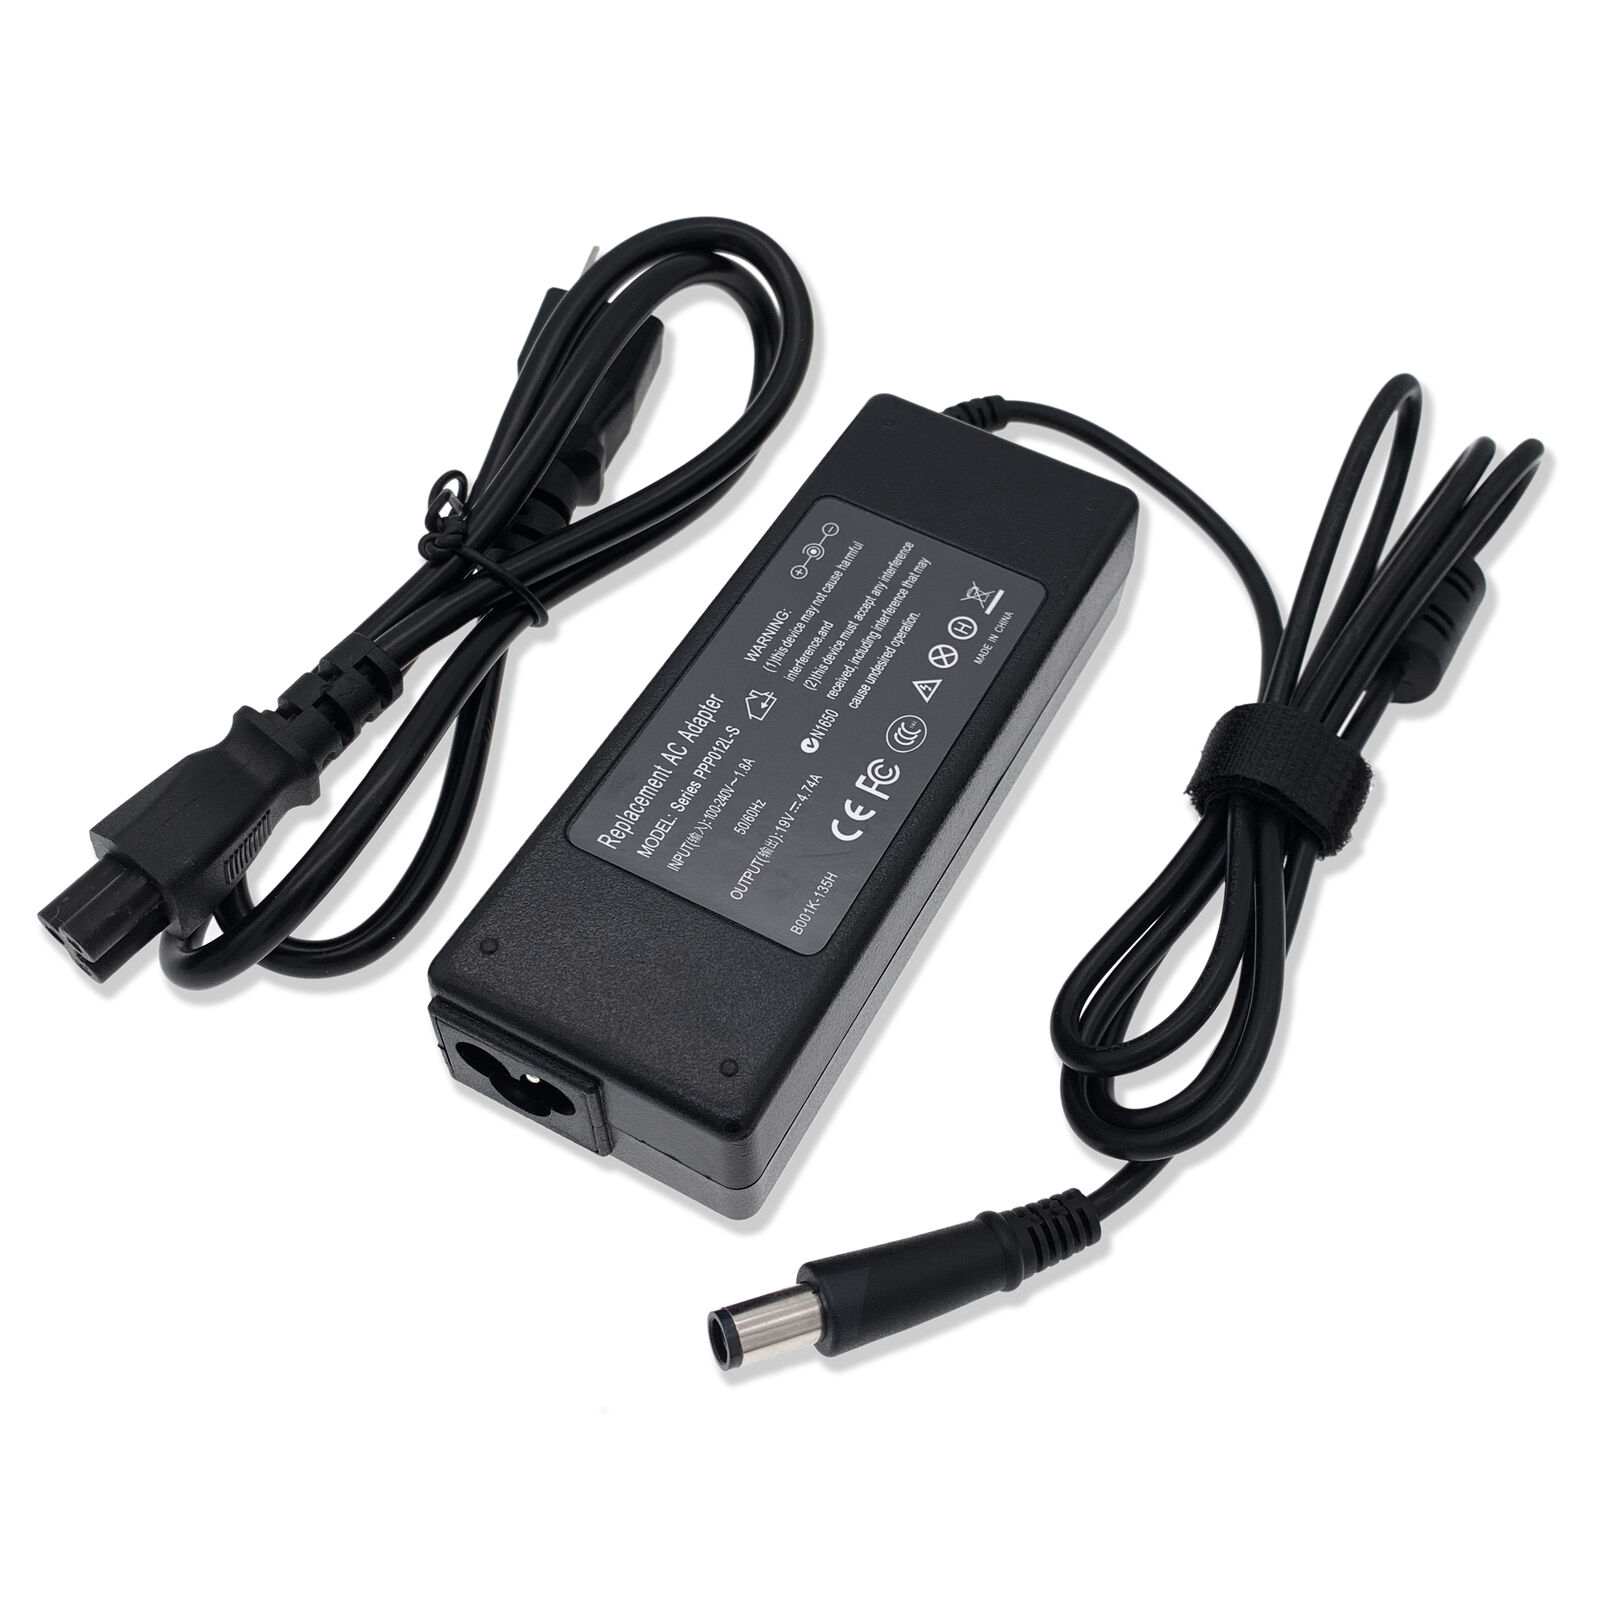 AC Adapter Battery Charger For HP Compaq nc8430 nx9420 Laptop Power Supply Cord